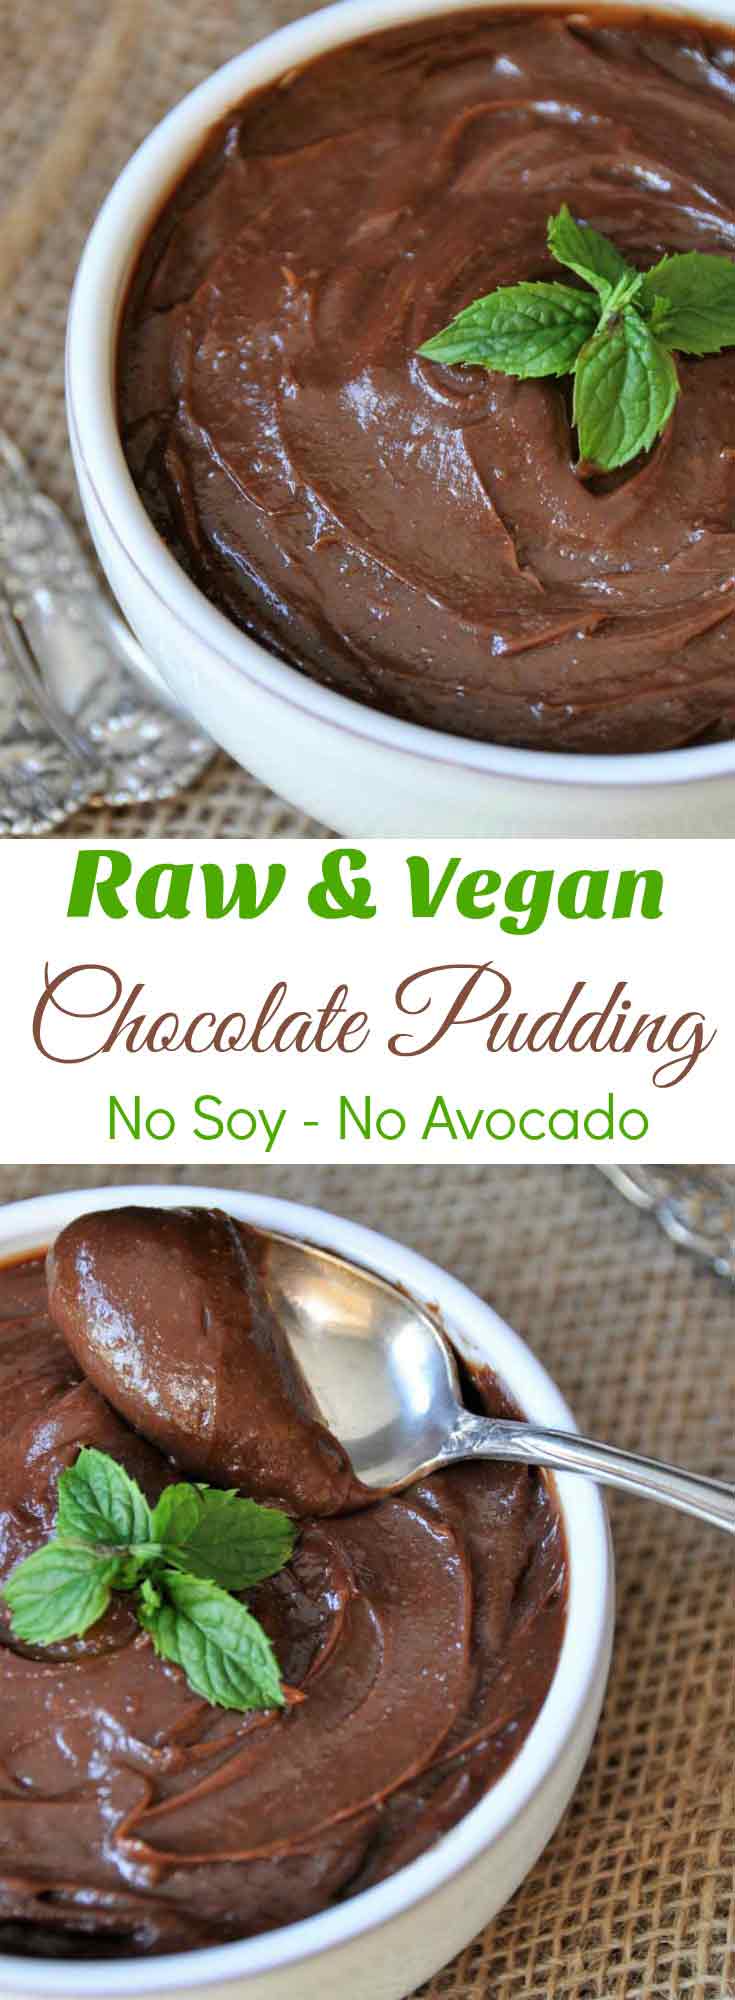 Silky smooth chocolate pudding made with only 4 ingredients! A healthier way to dessert! www.veganosity.com